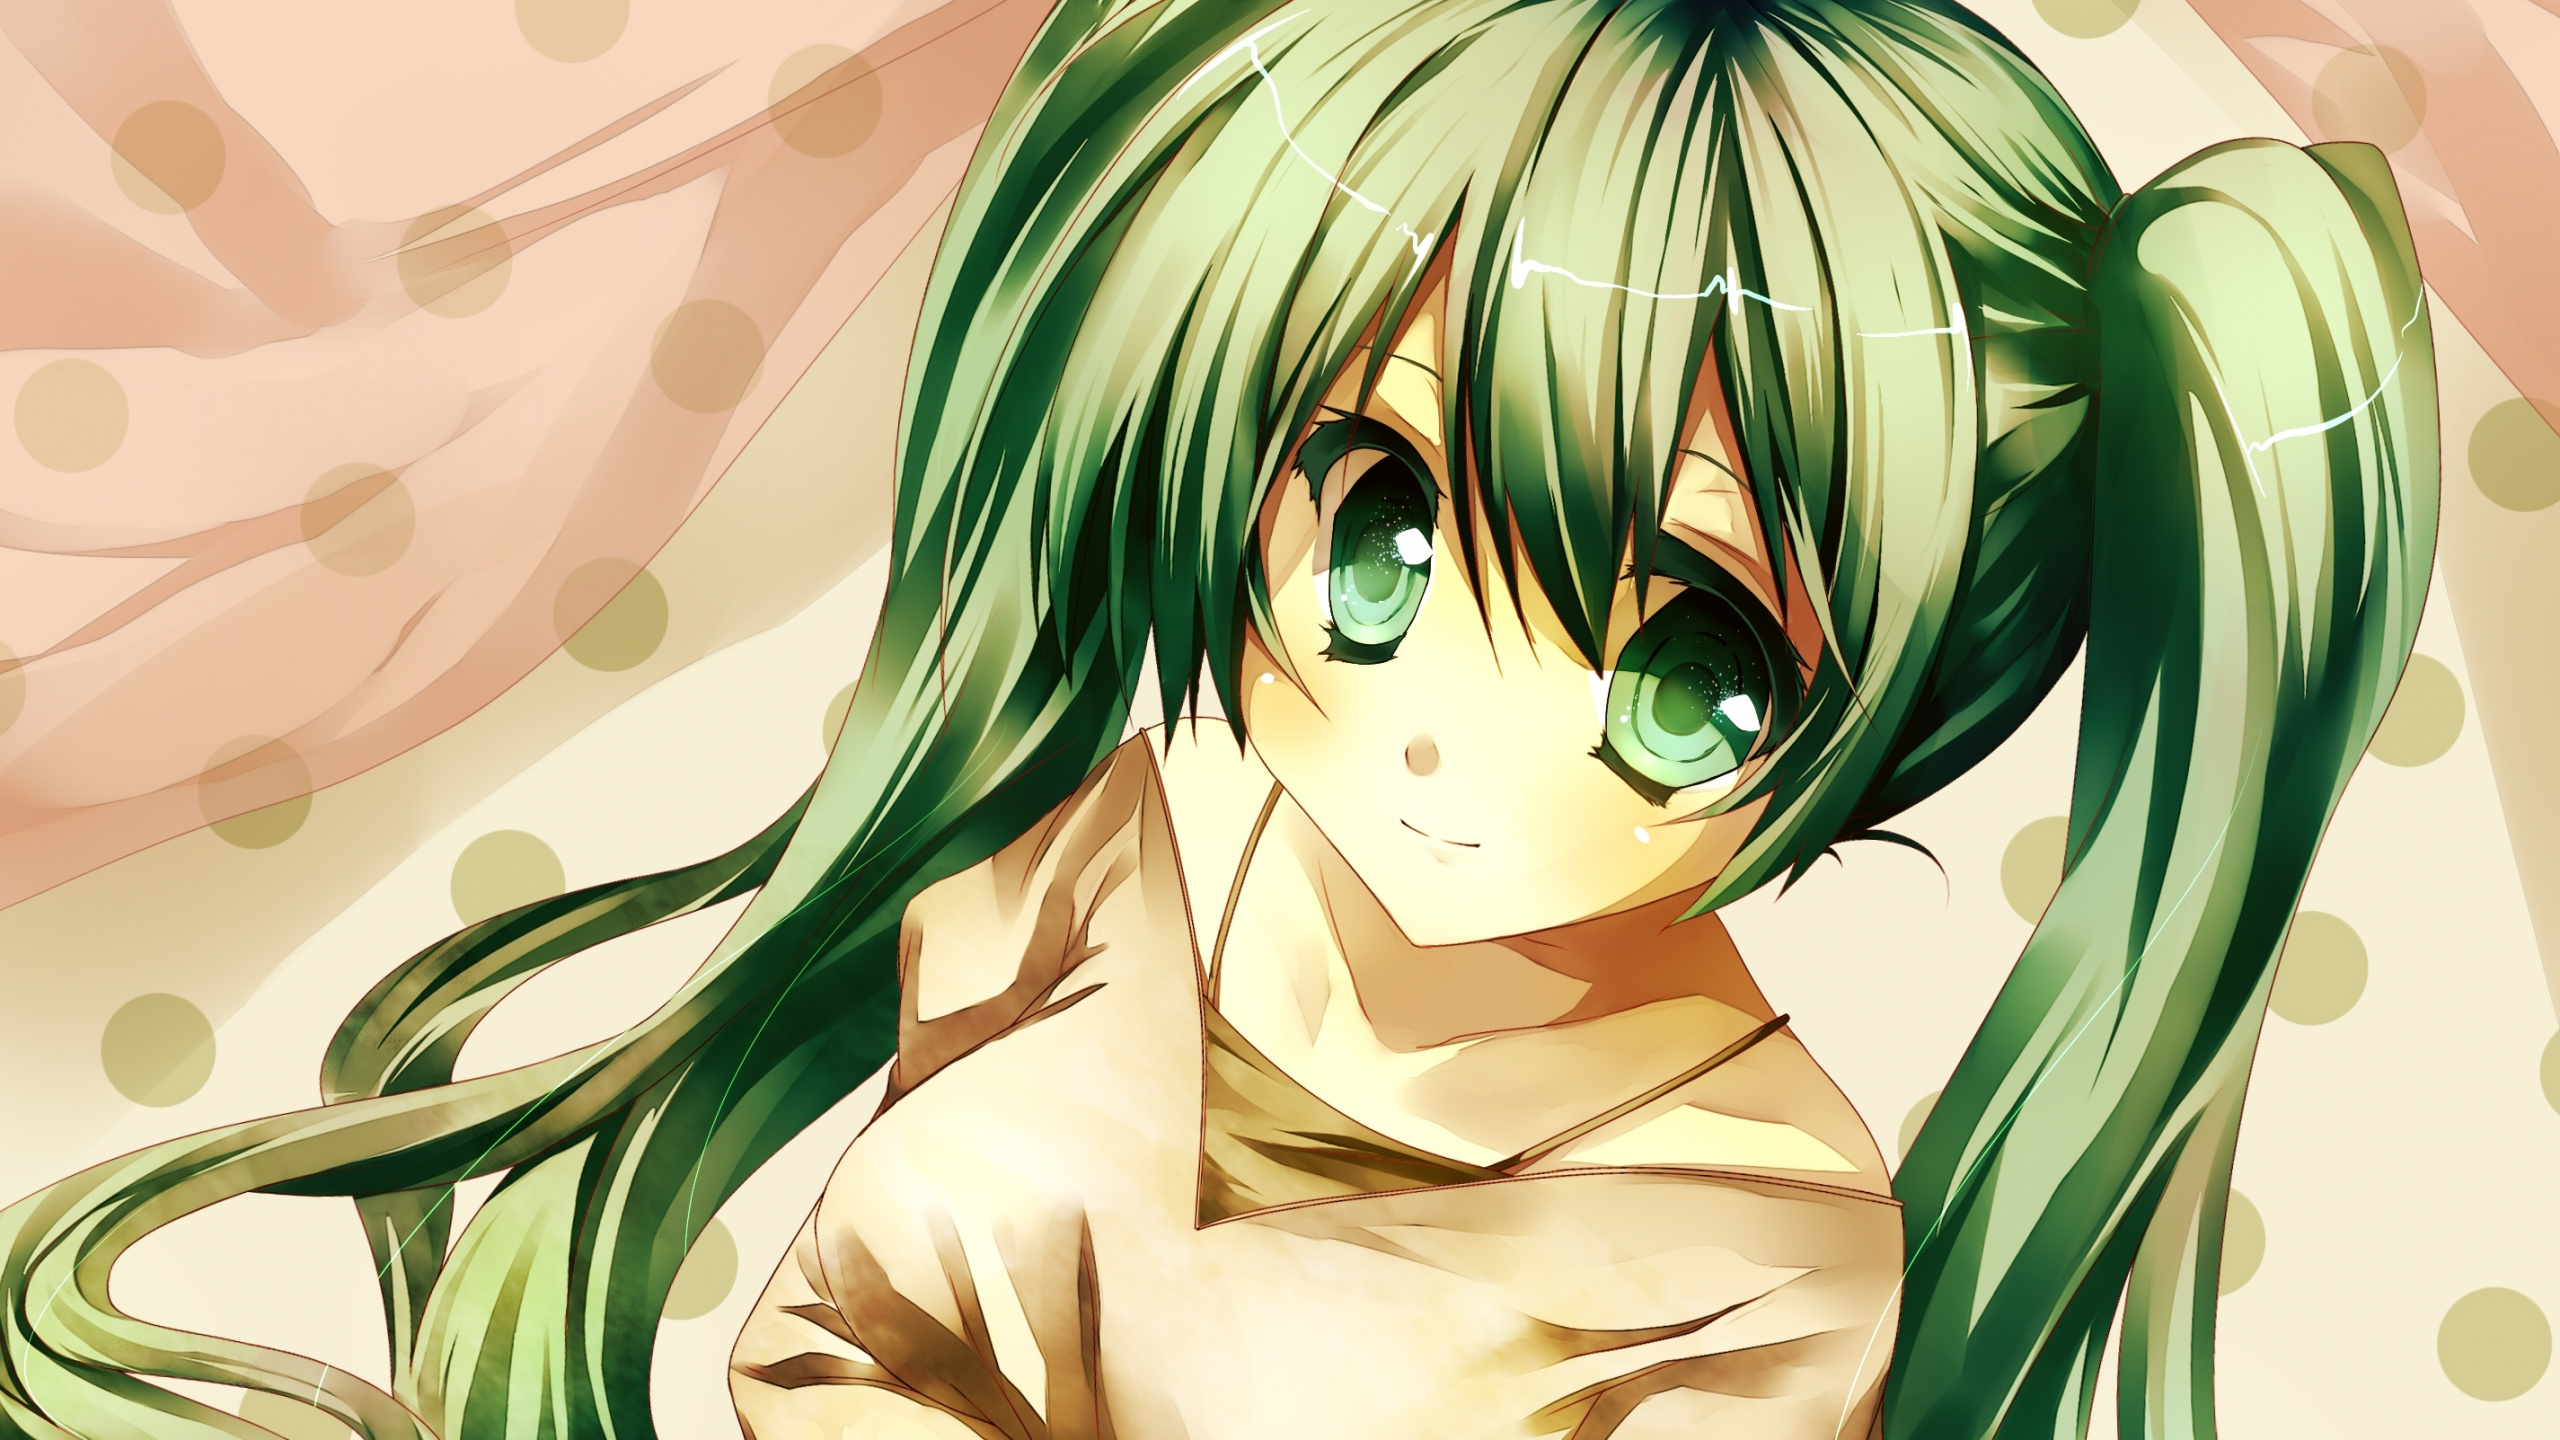 Green Haired Male Anime Character. Wallpaper in 2560x1440 Resolution